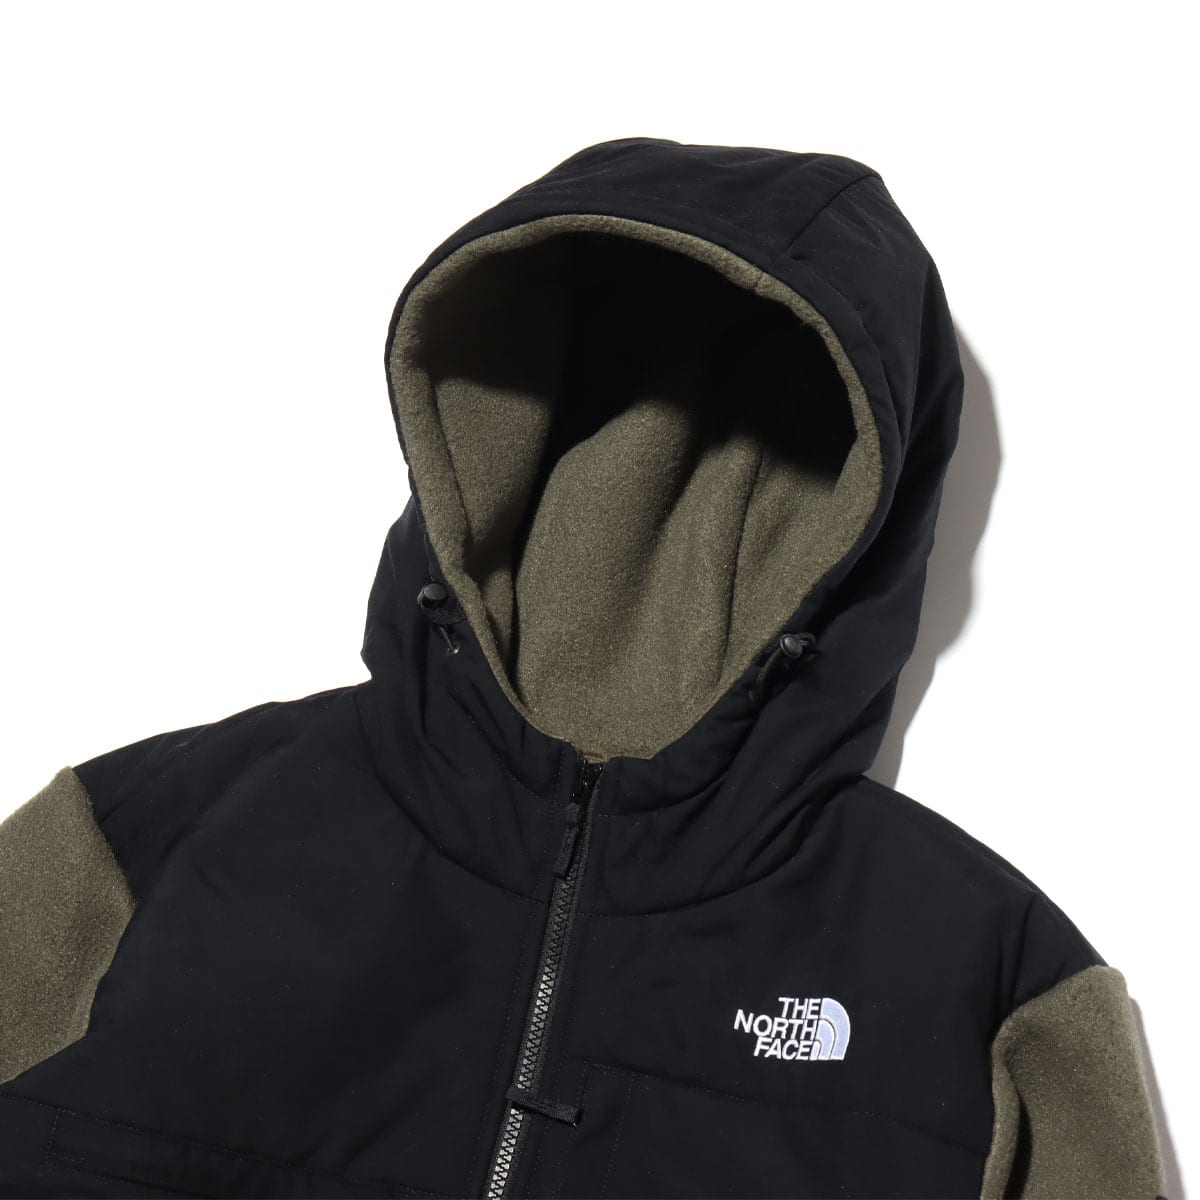 THE NORTH FACE DENALI HOODIE NEWTAUPE